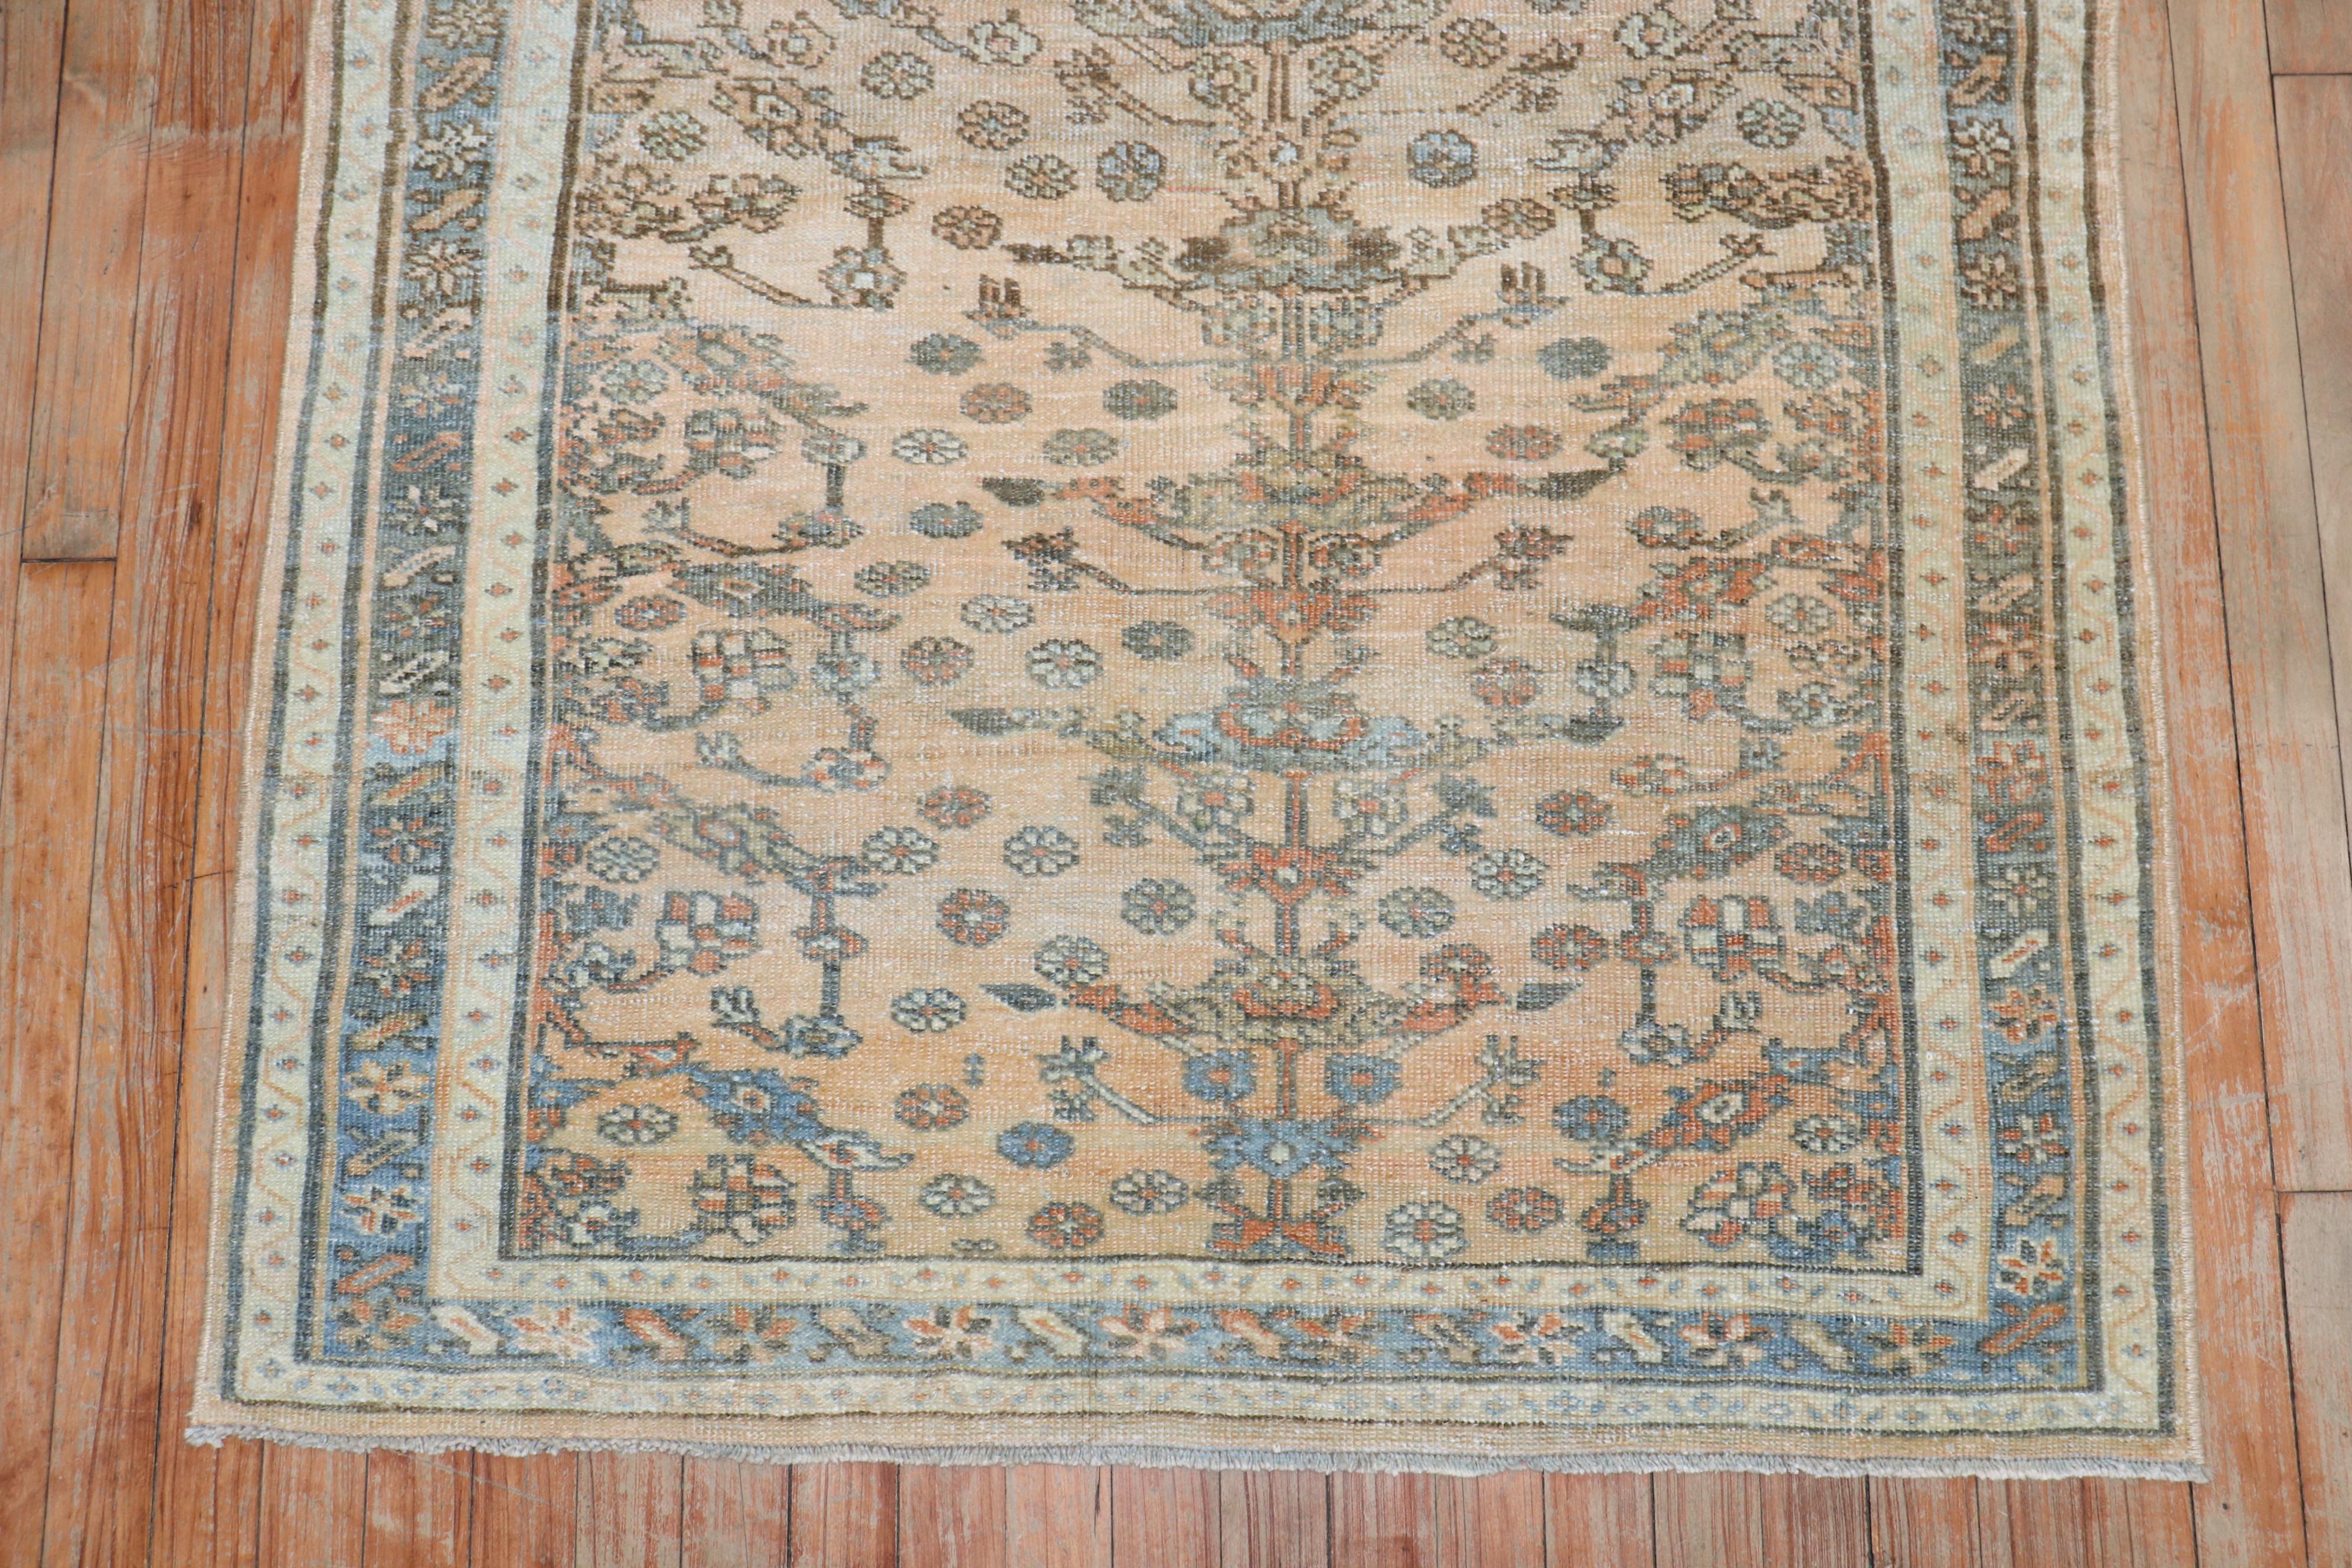 Scatter size Persian rug from the 2nd quarter of the 20th century.

Measures: 3'7'' x 5'2''.

